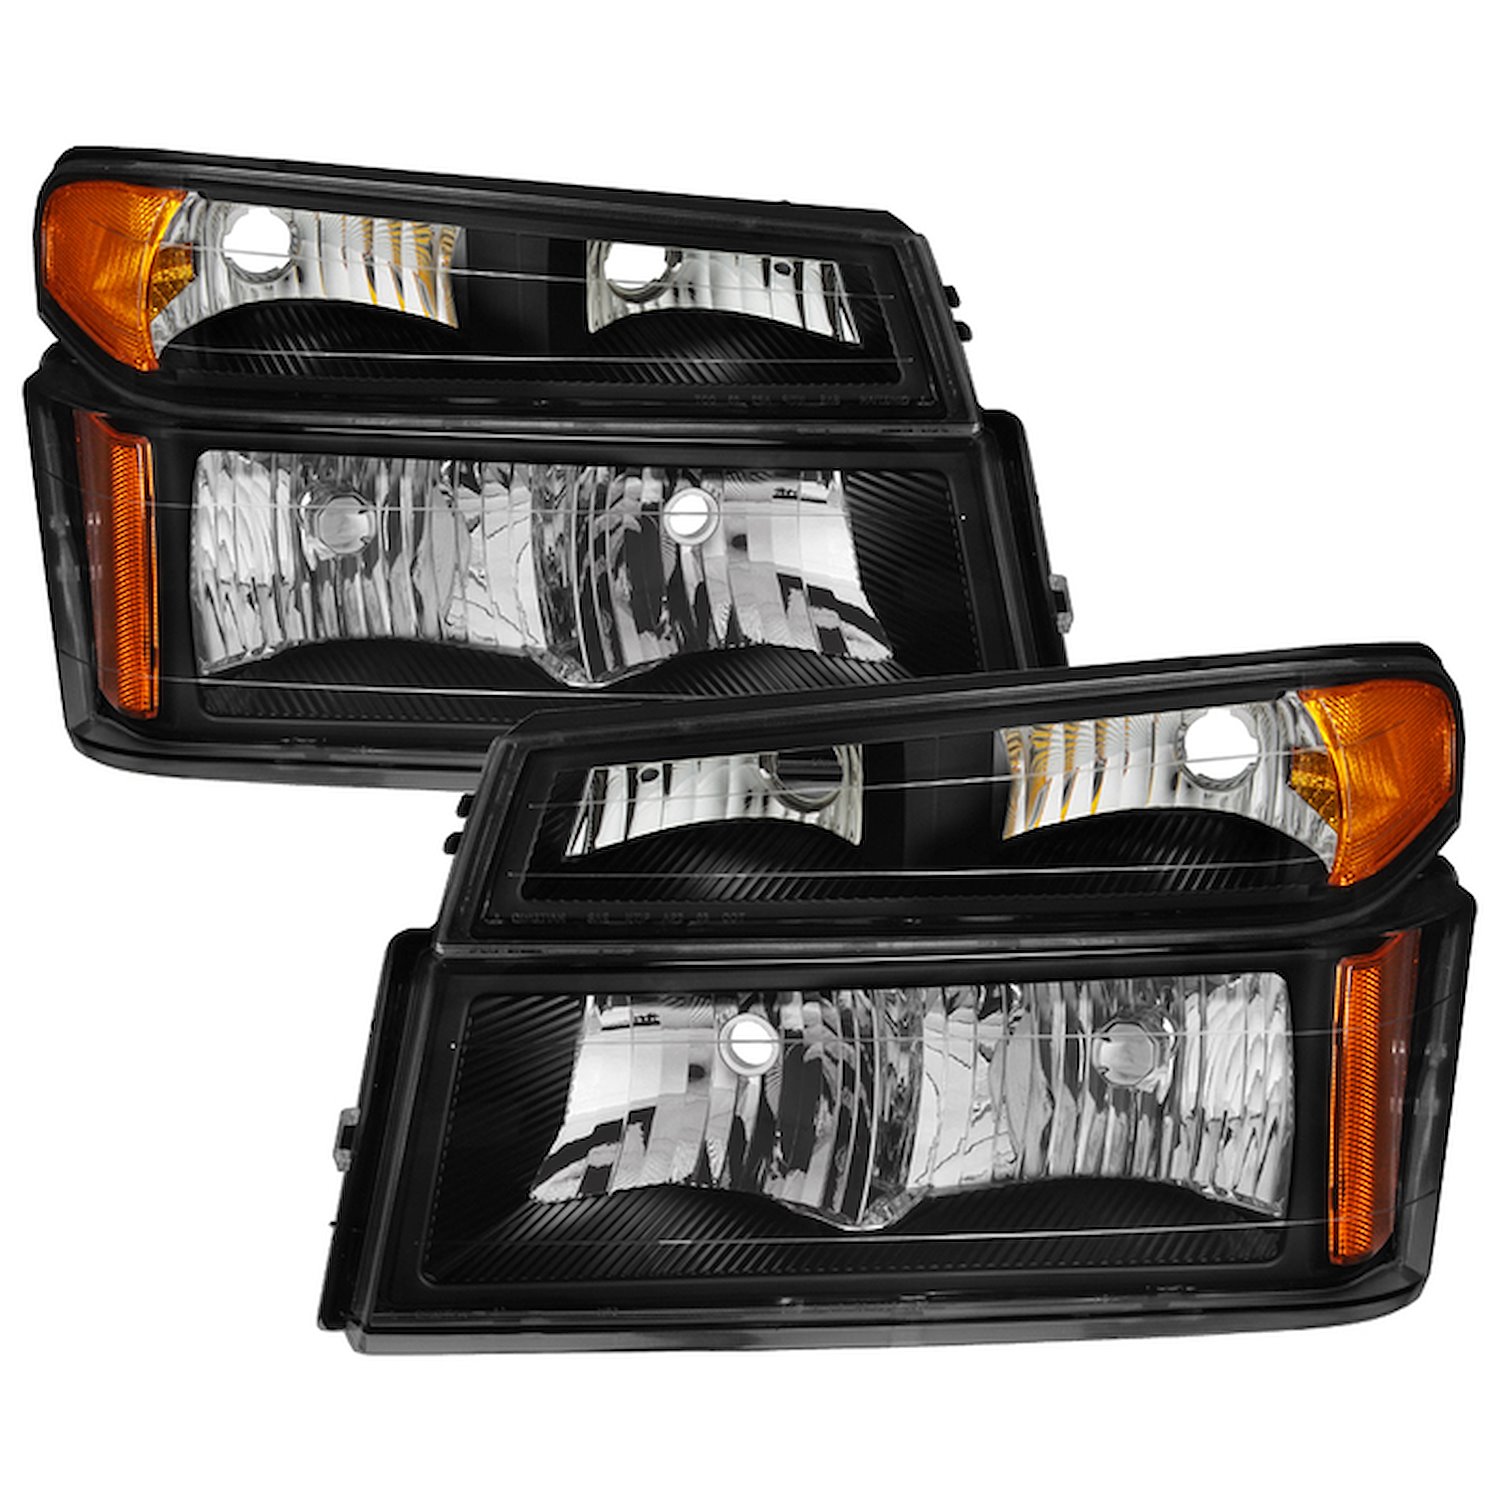 xTune OEM Style Crystal Headlights 2004-2012 Chevy Colorado/Canyon